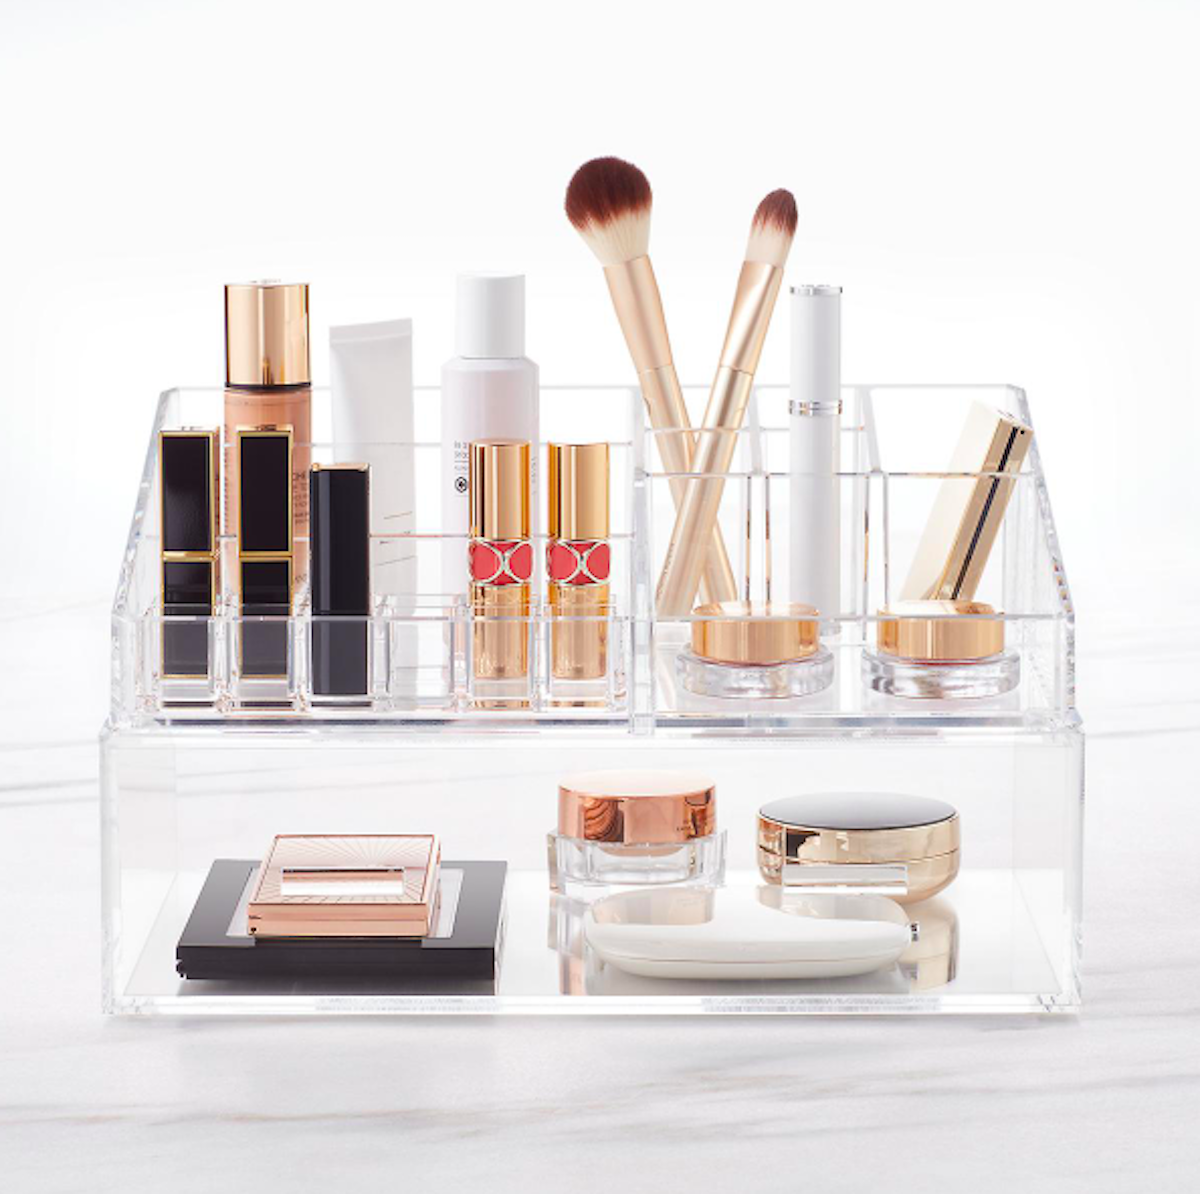 Get Your Makeup Organized in 2022 With 11 Outstanding Products